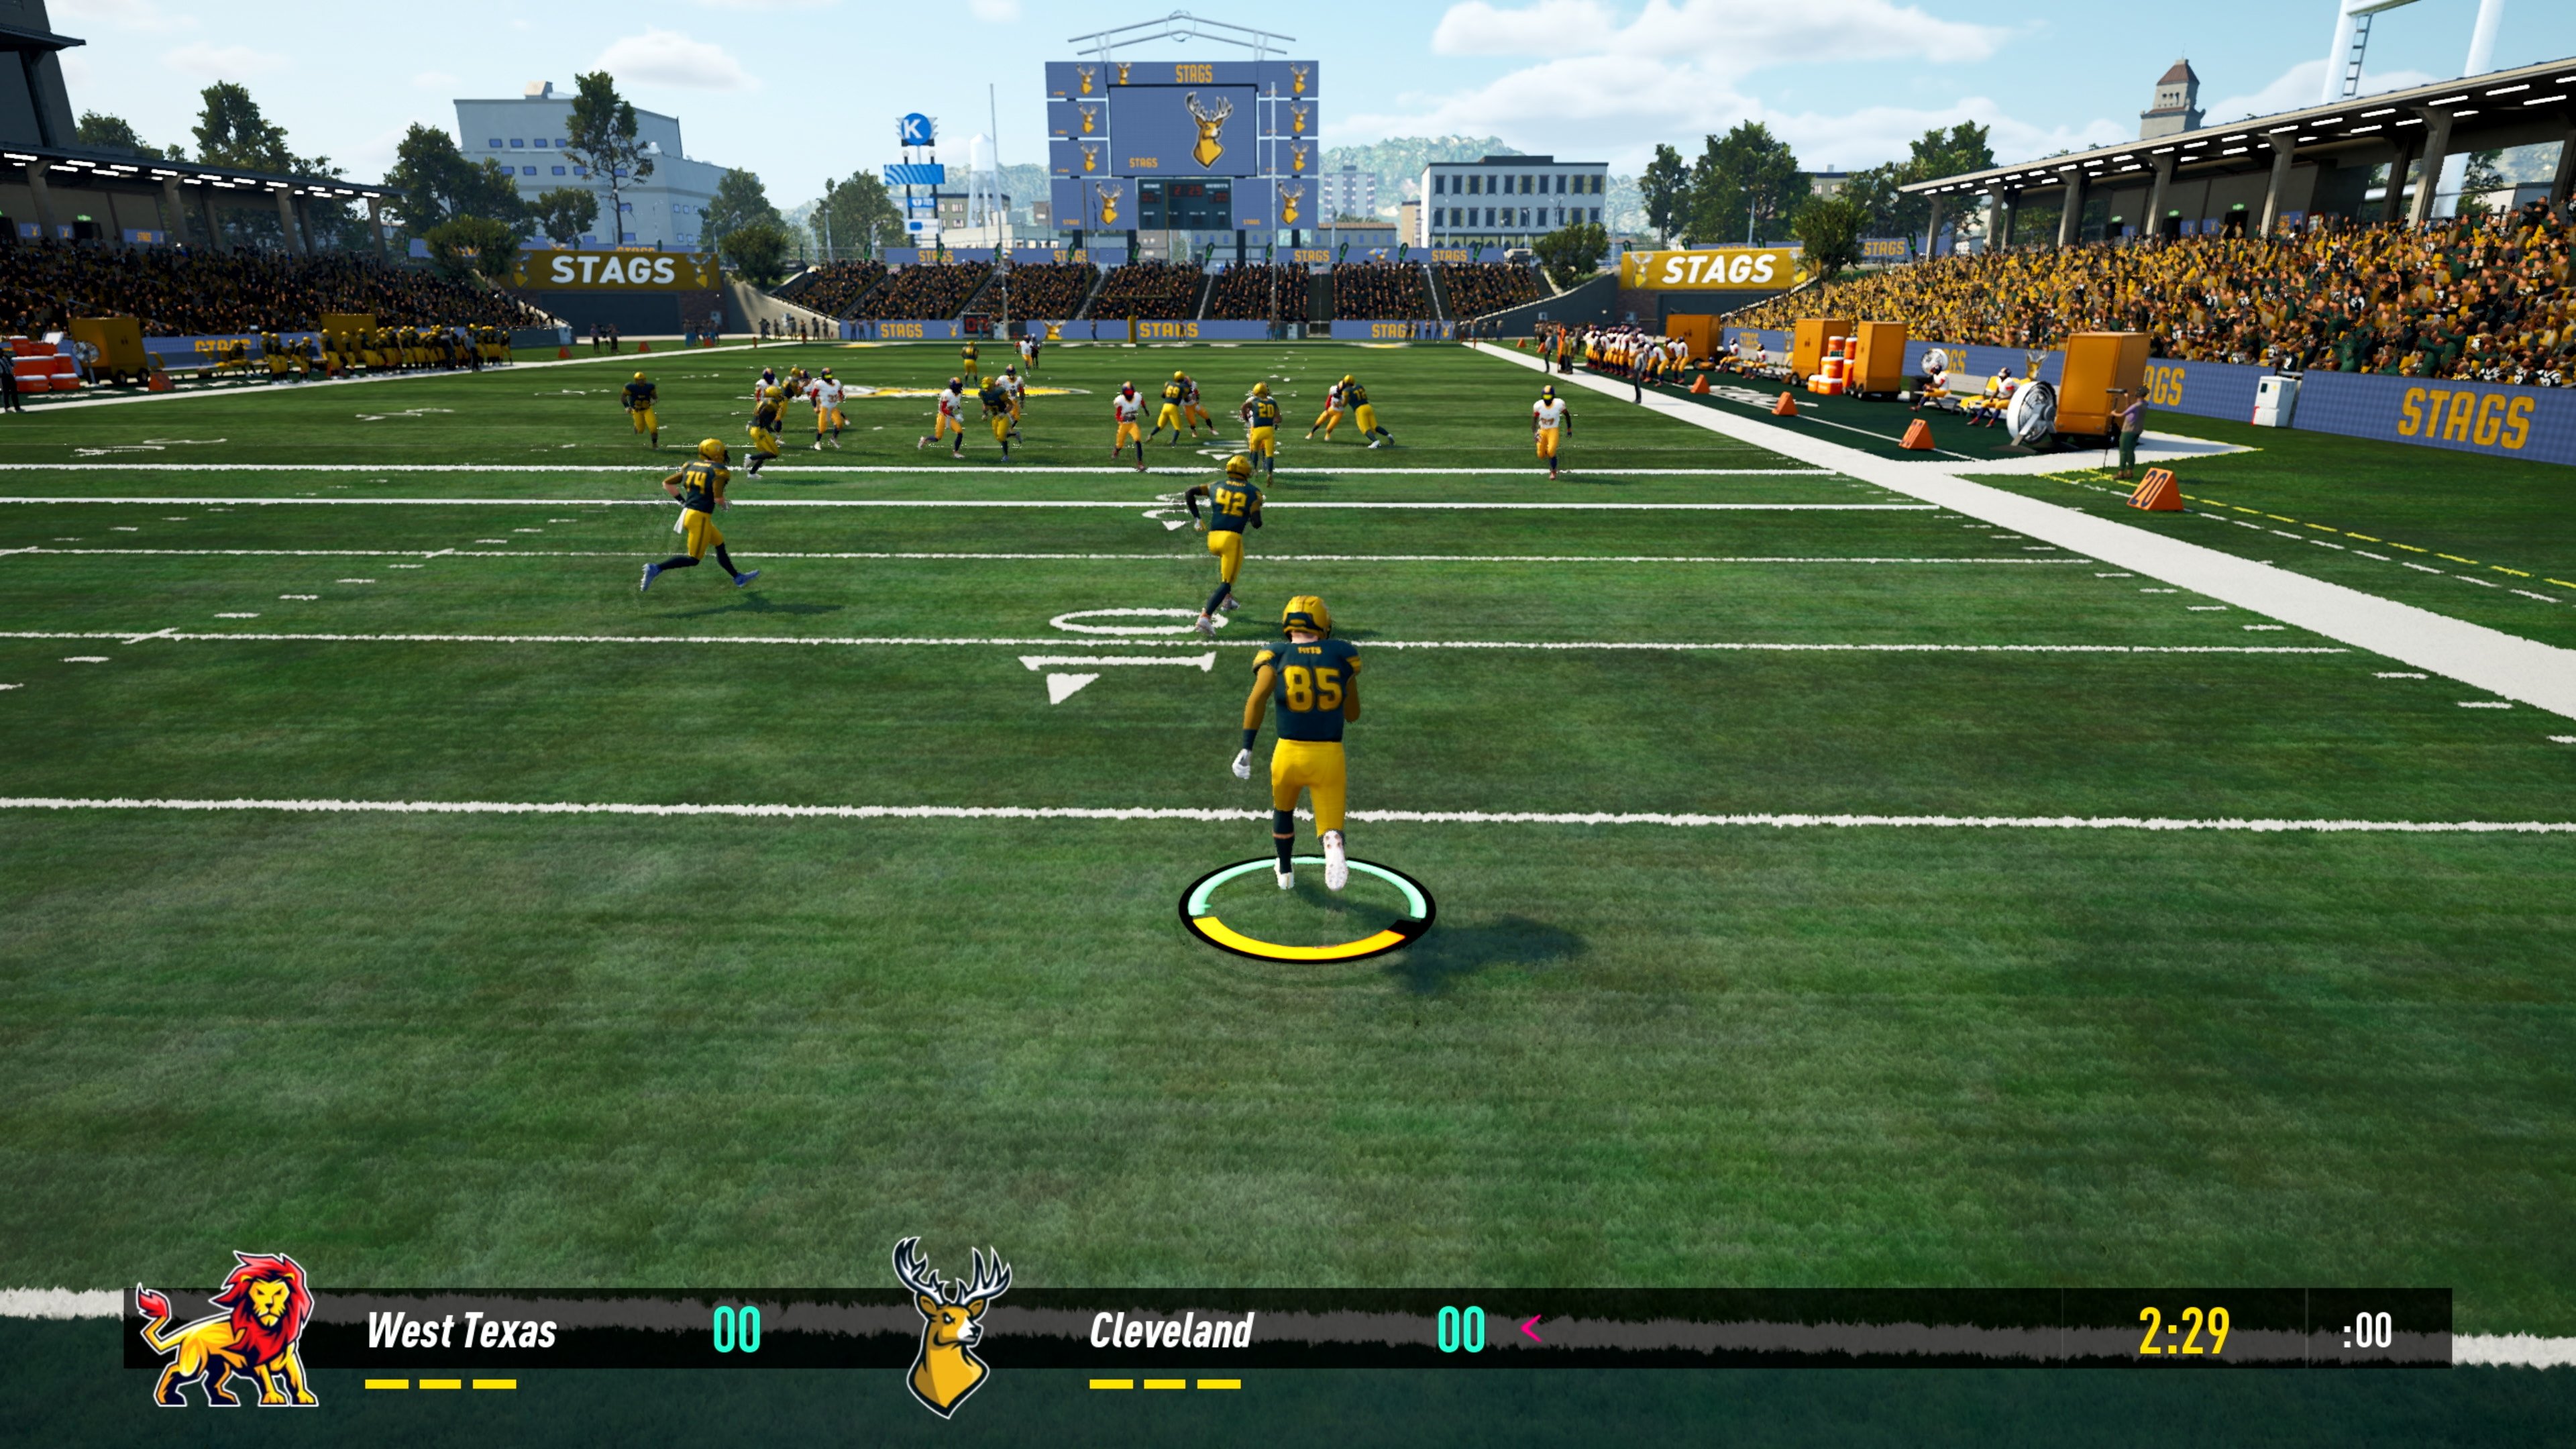 Free-to-play football simulation game Maximum Football announced for PS5, Xbox Series, PS4, Xbox One, and PC